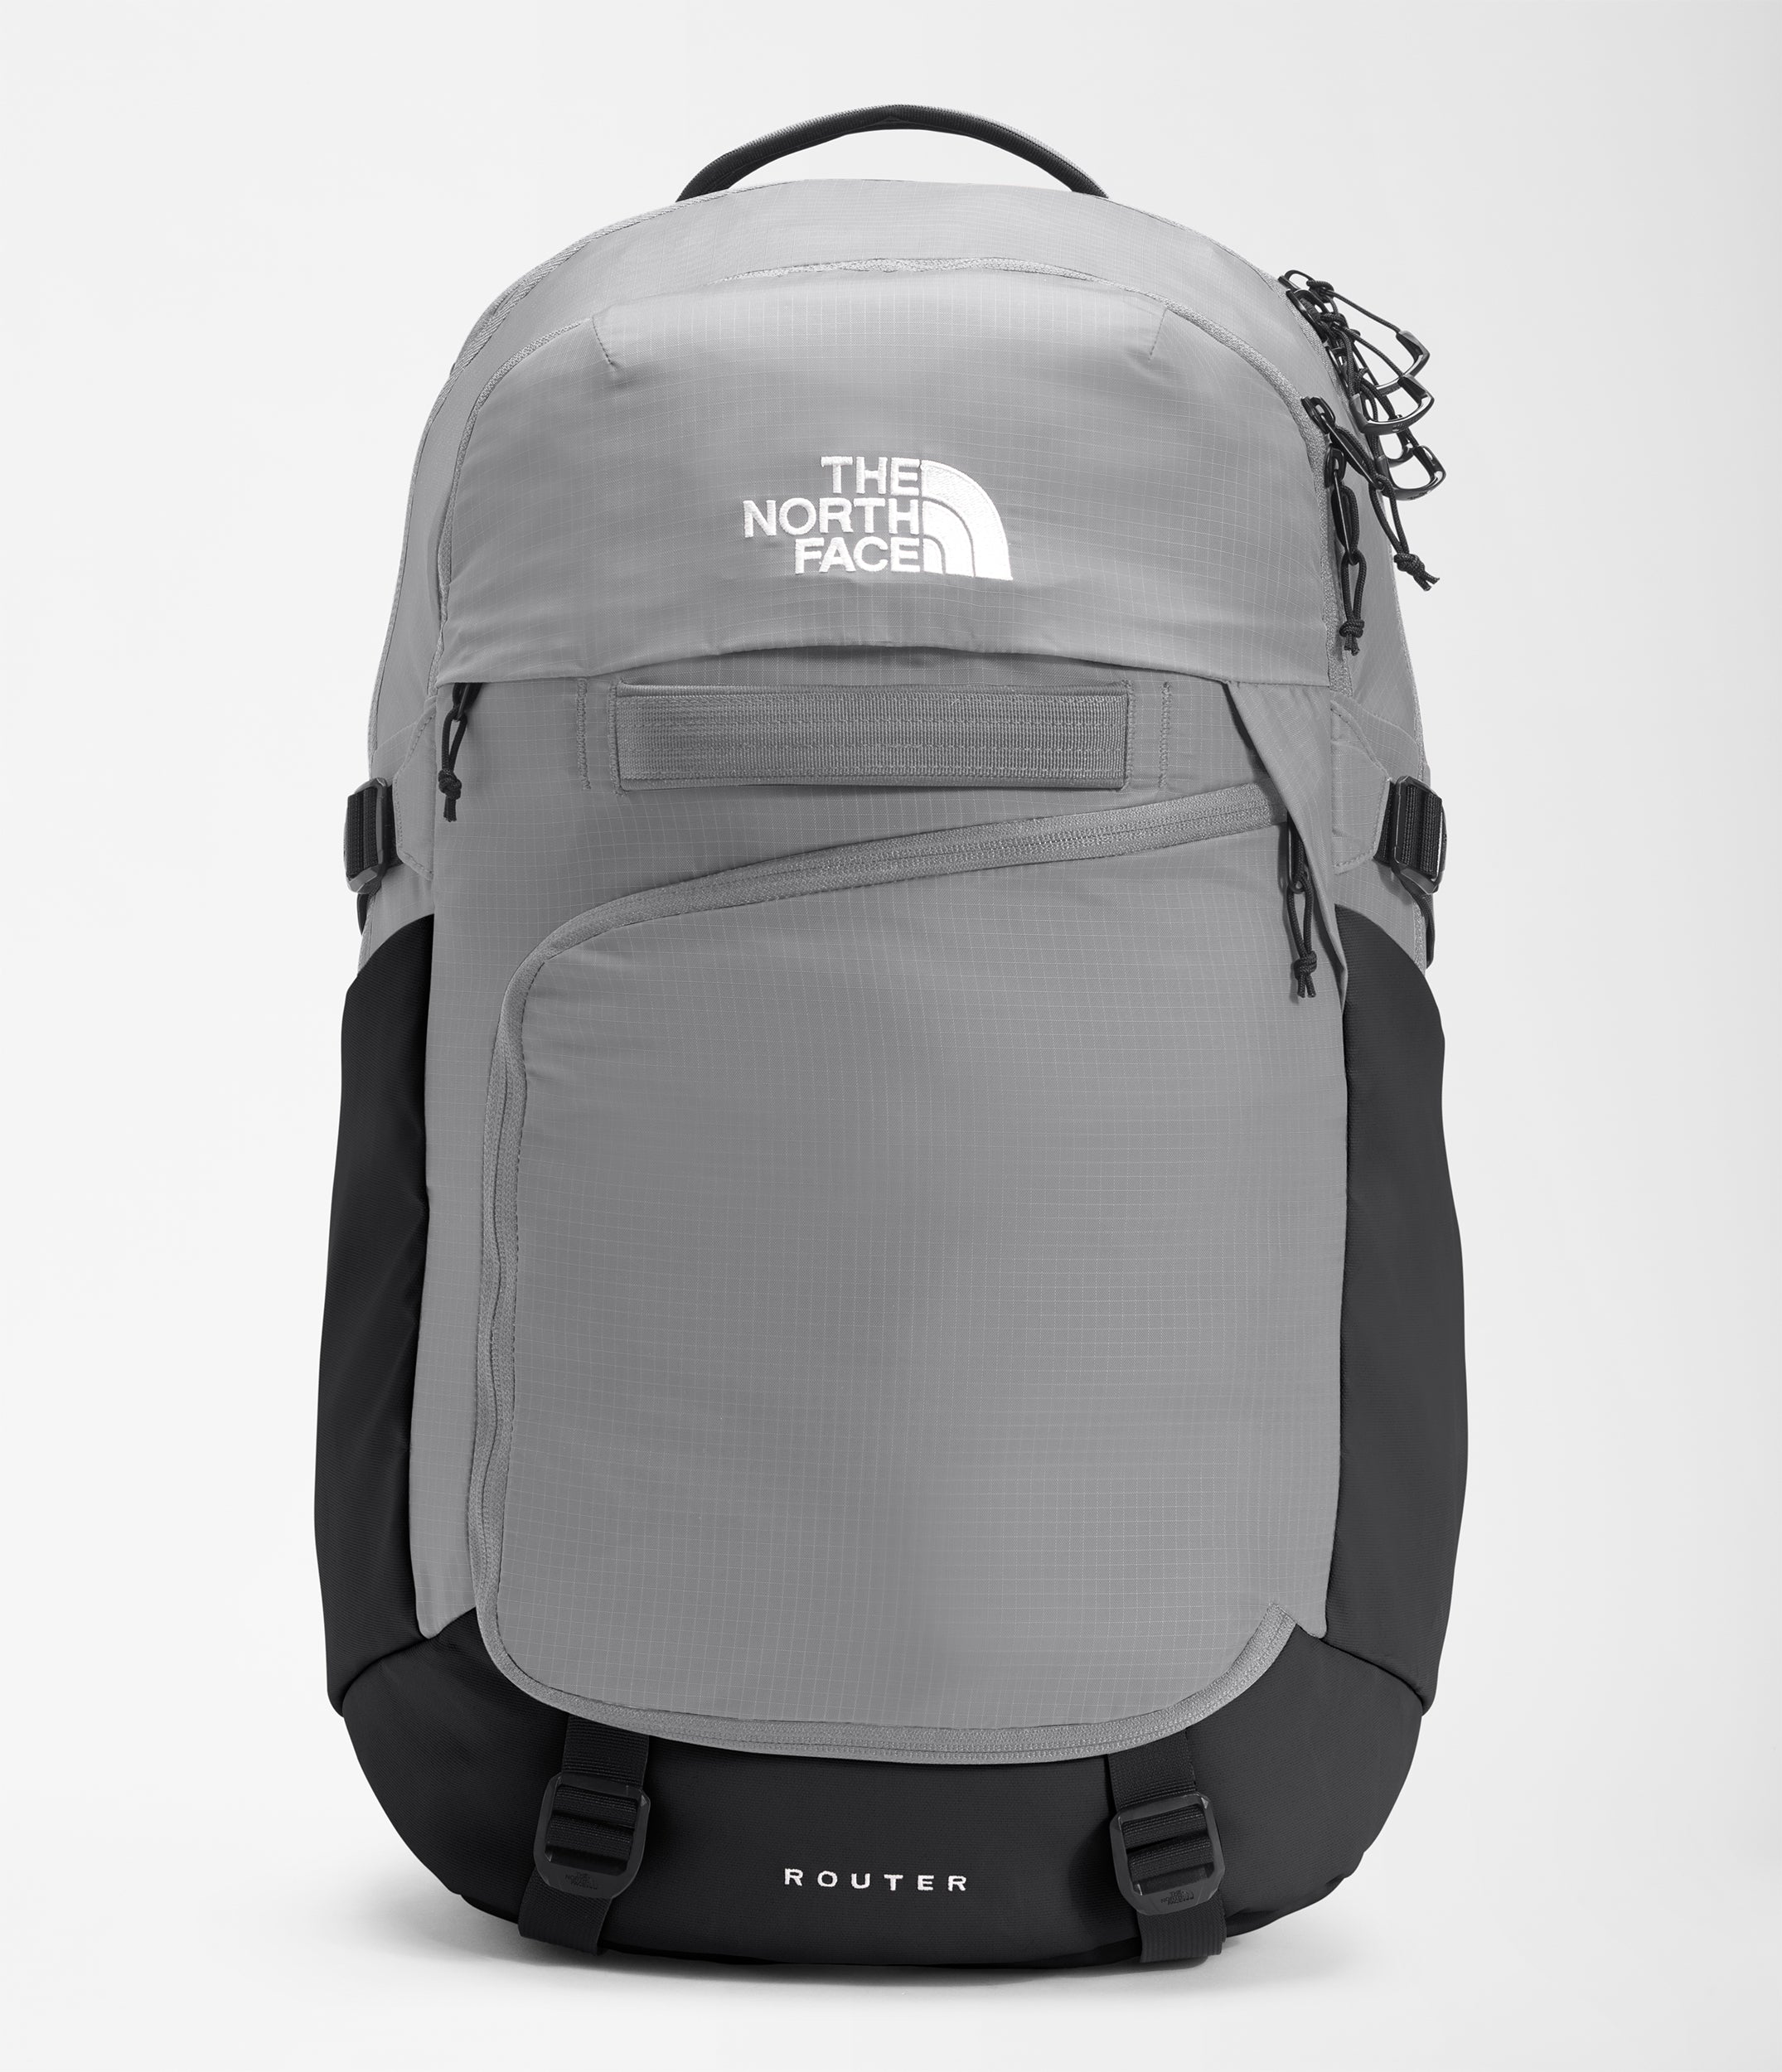 The North Face Router Backpack Meld Backpack 